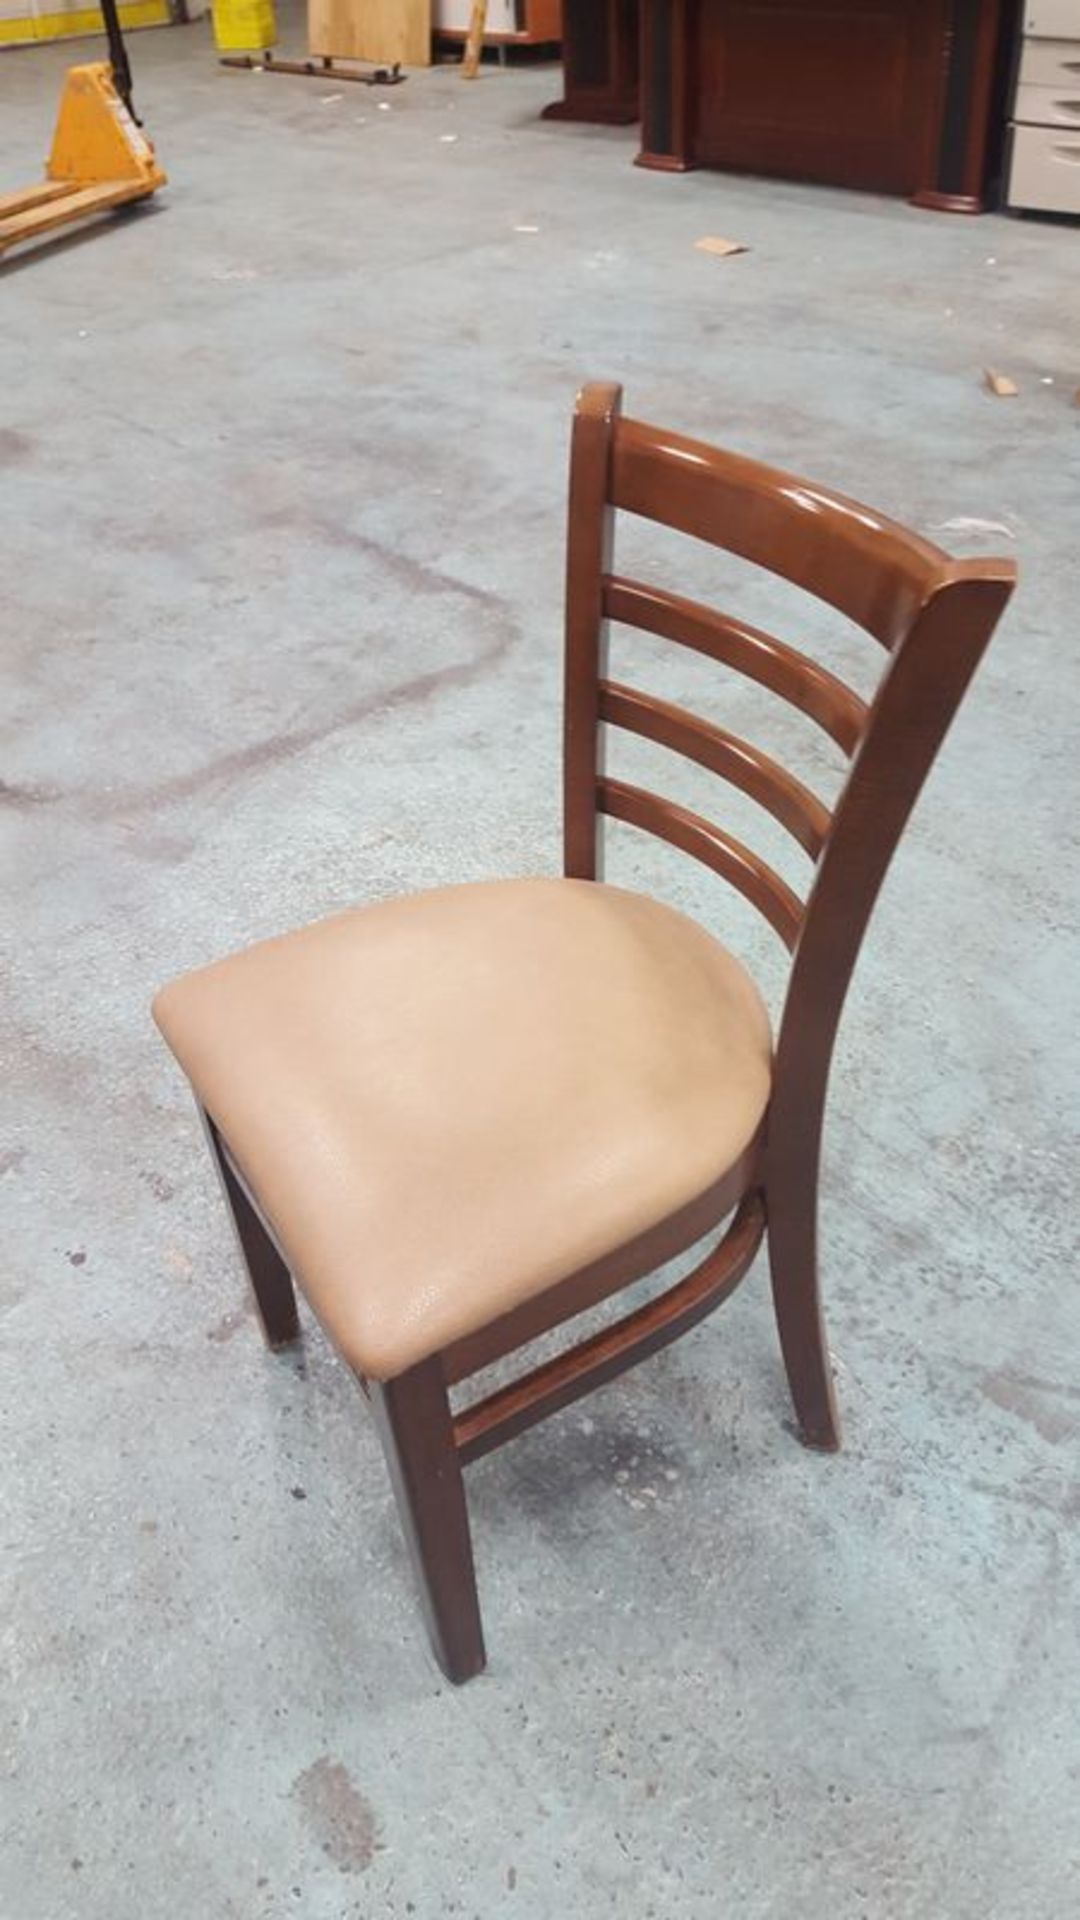 10 padded Bentwood Chairs = Price per chair times 10